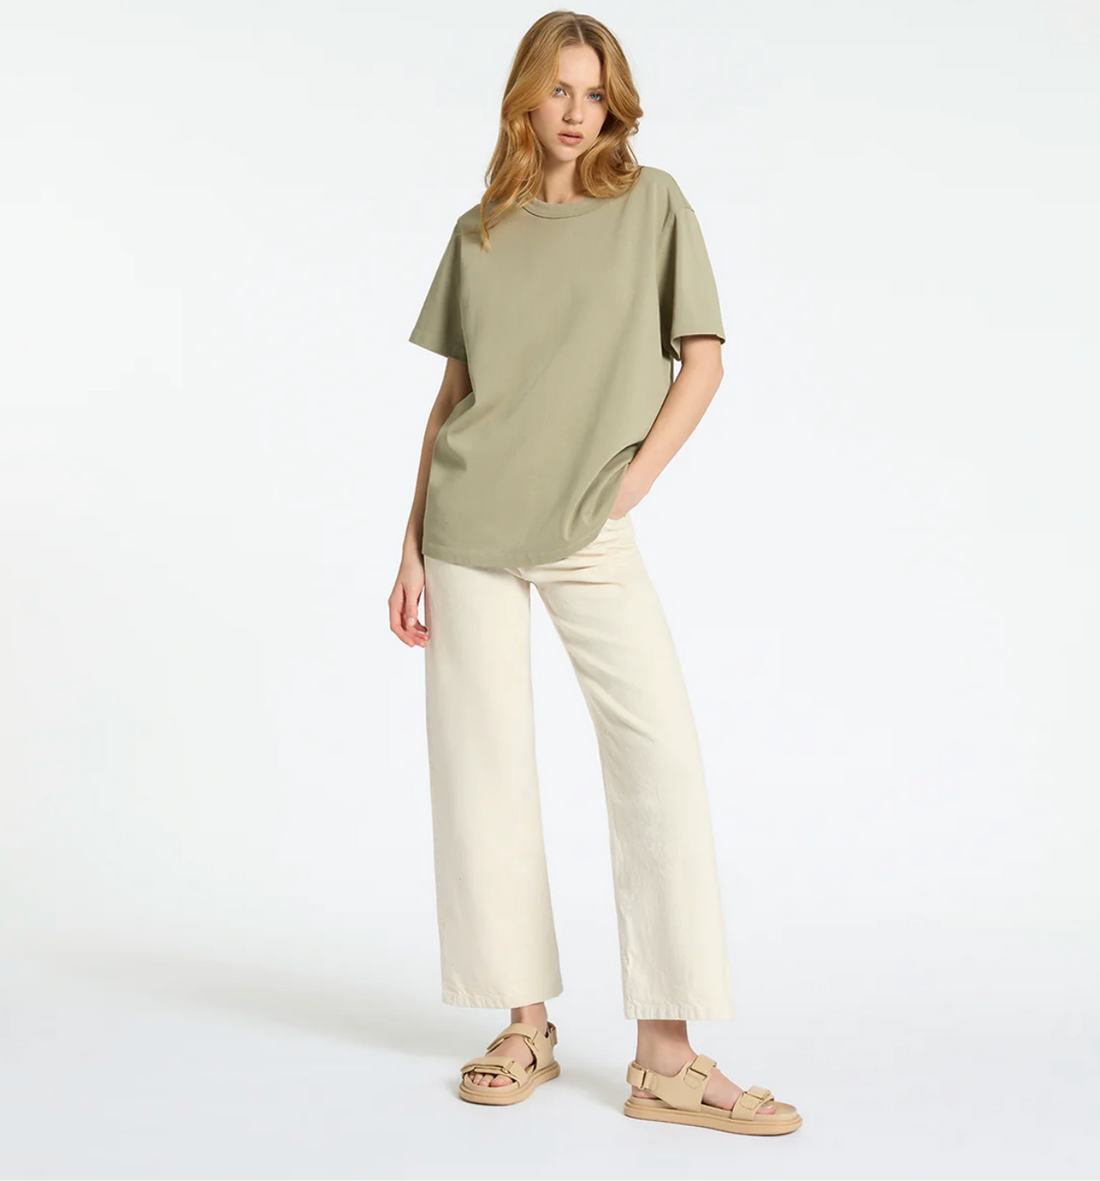 Status Anxiety Feels Right Women's Tee - Washed Sage